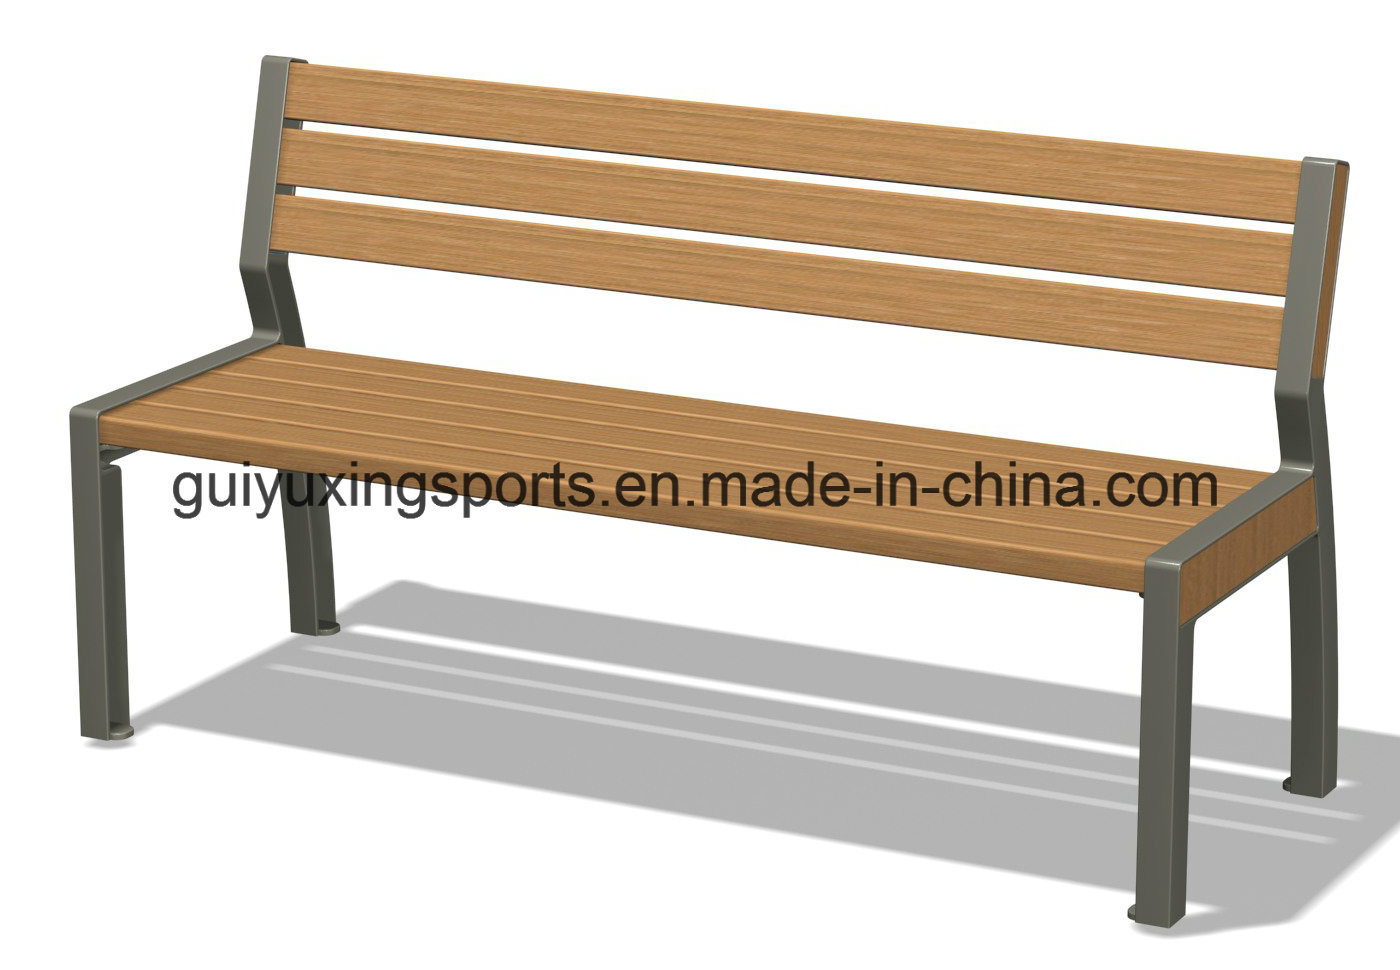 Outdoor Modern Wooden Bench for Park Use